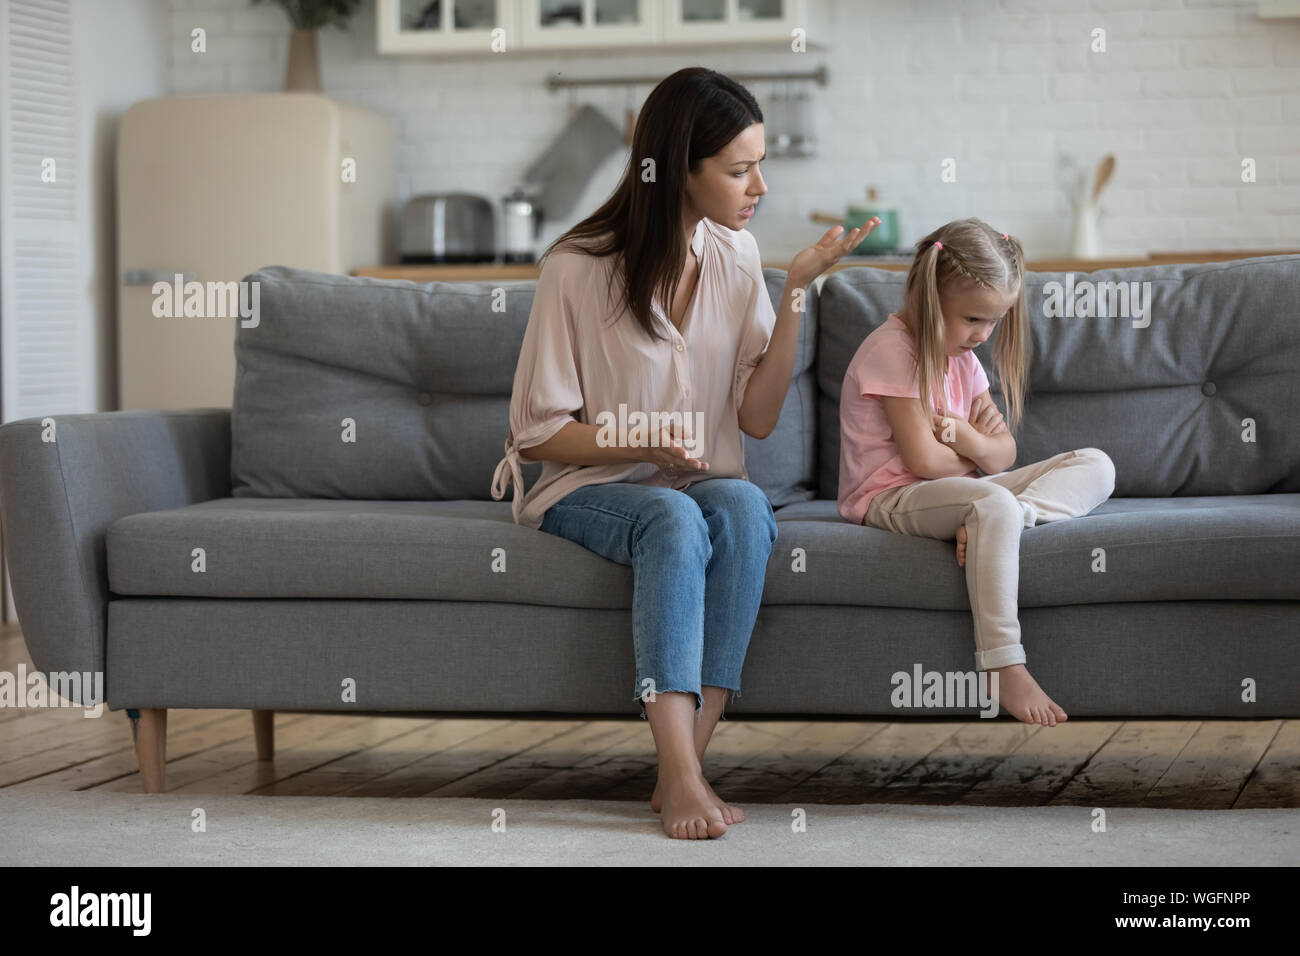 Mom scolds little daughter sitting on couch Stock Photo